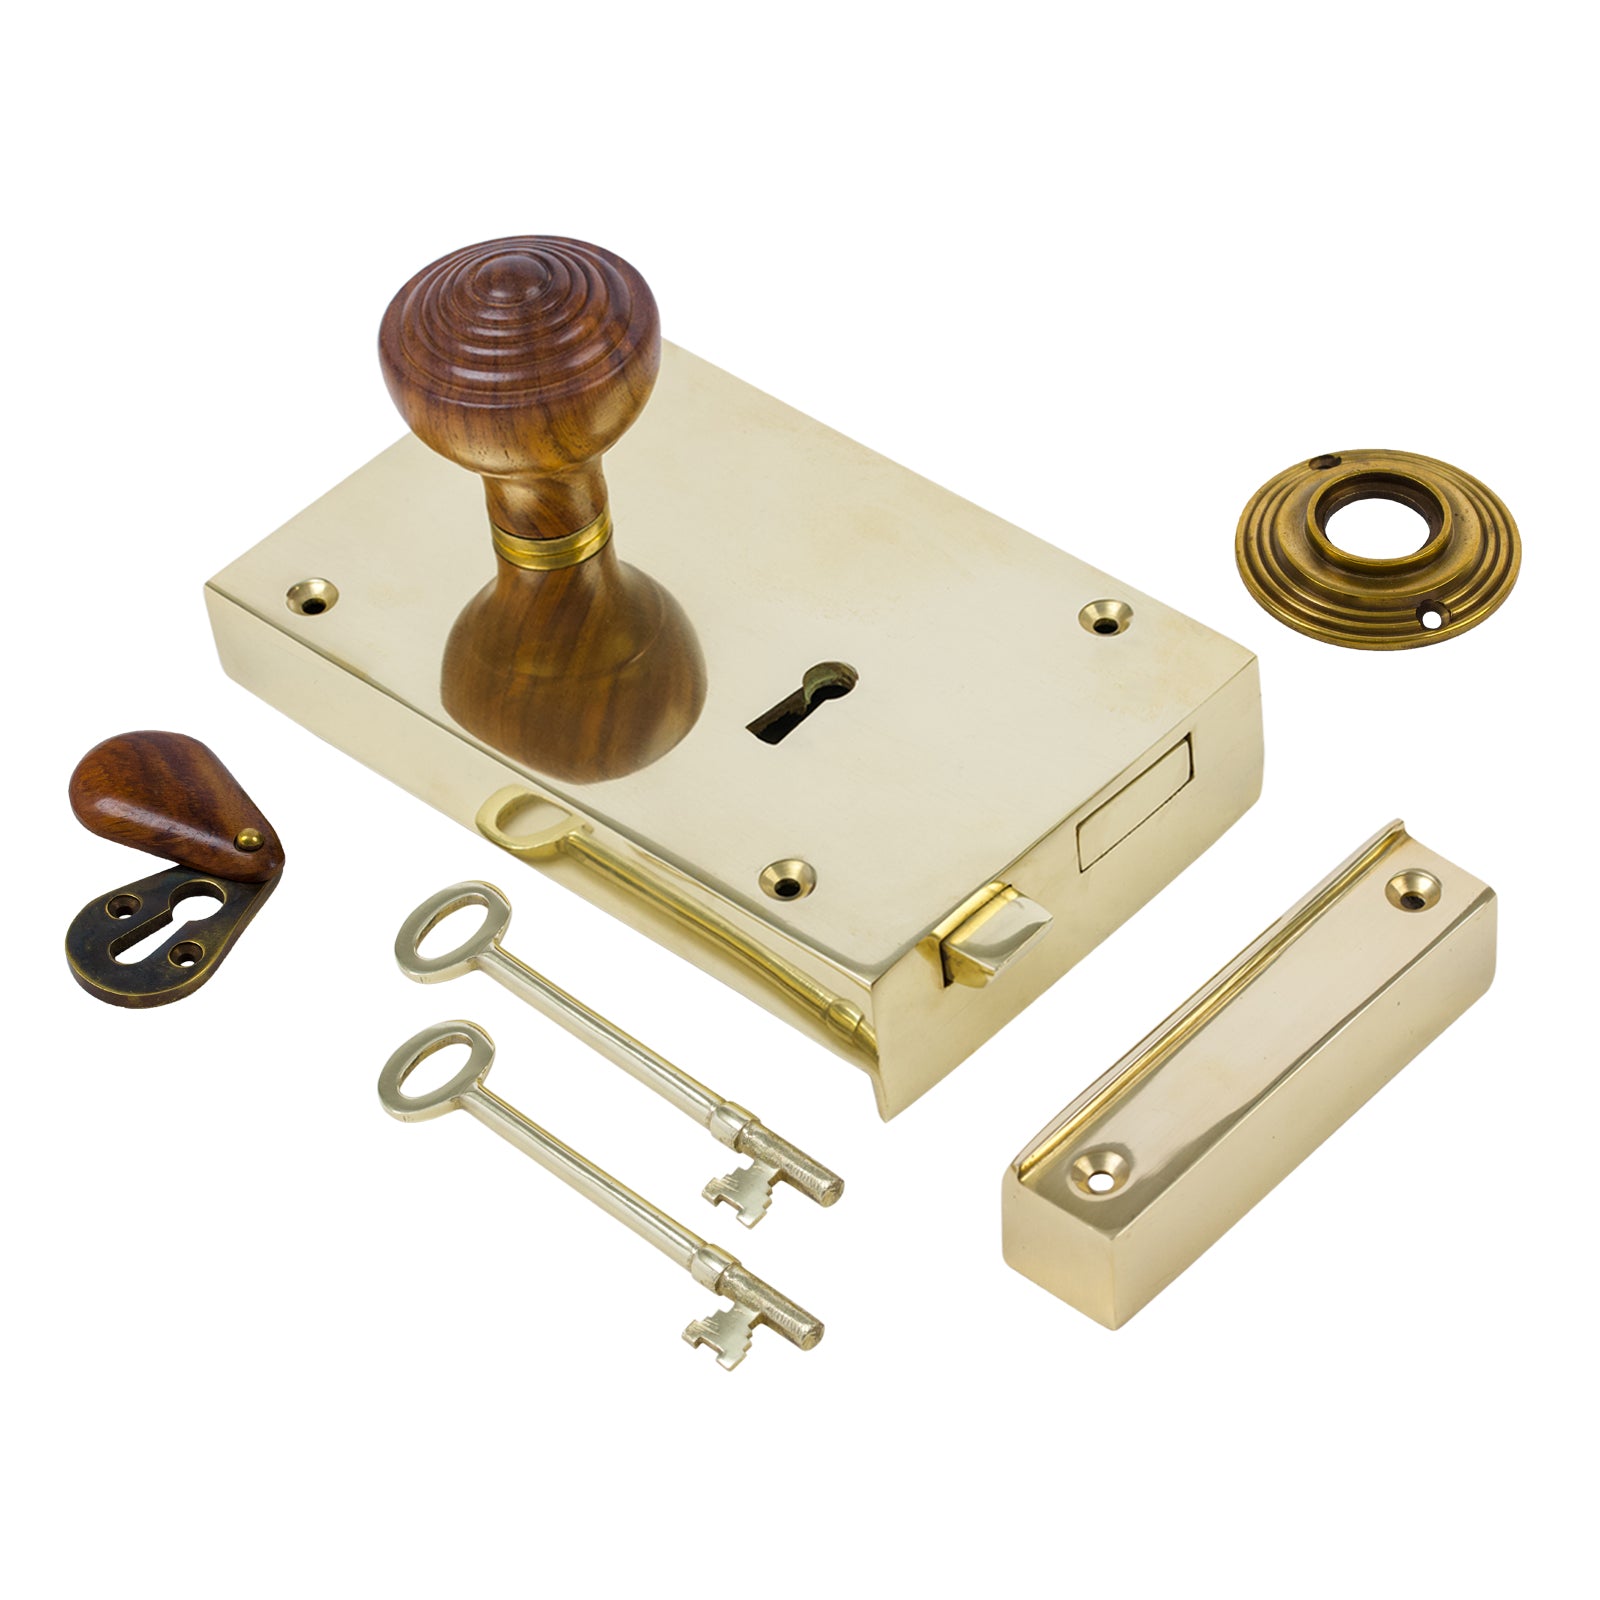 SHOW Left Handed Large Brass Rim Lock with Ringed Door Knob Set - Rosewood